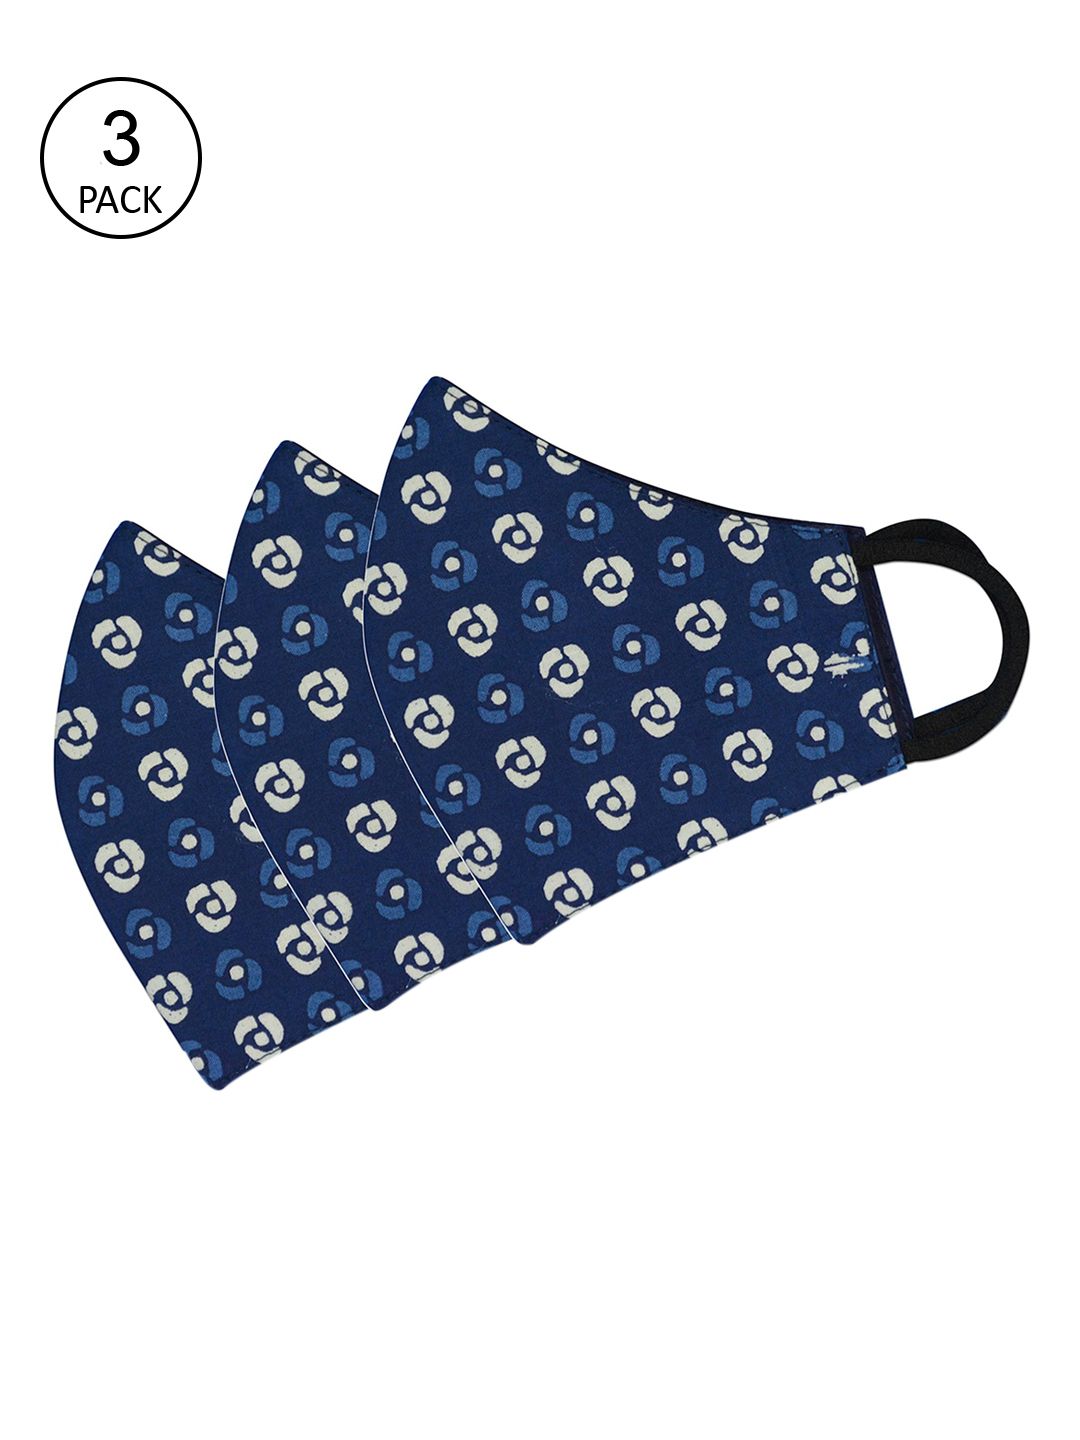 Tossido Pack Of 3 Blue & White Printed 3-Ply 100% Cotton Reusable Cloth Masks Price in India